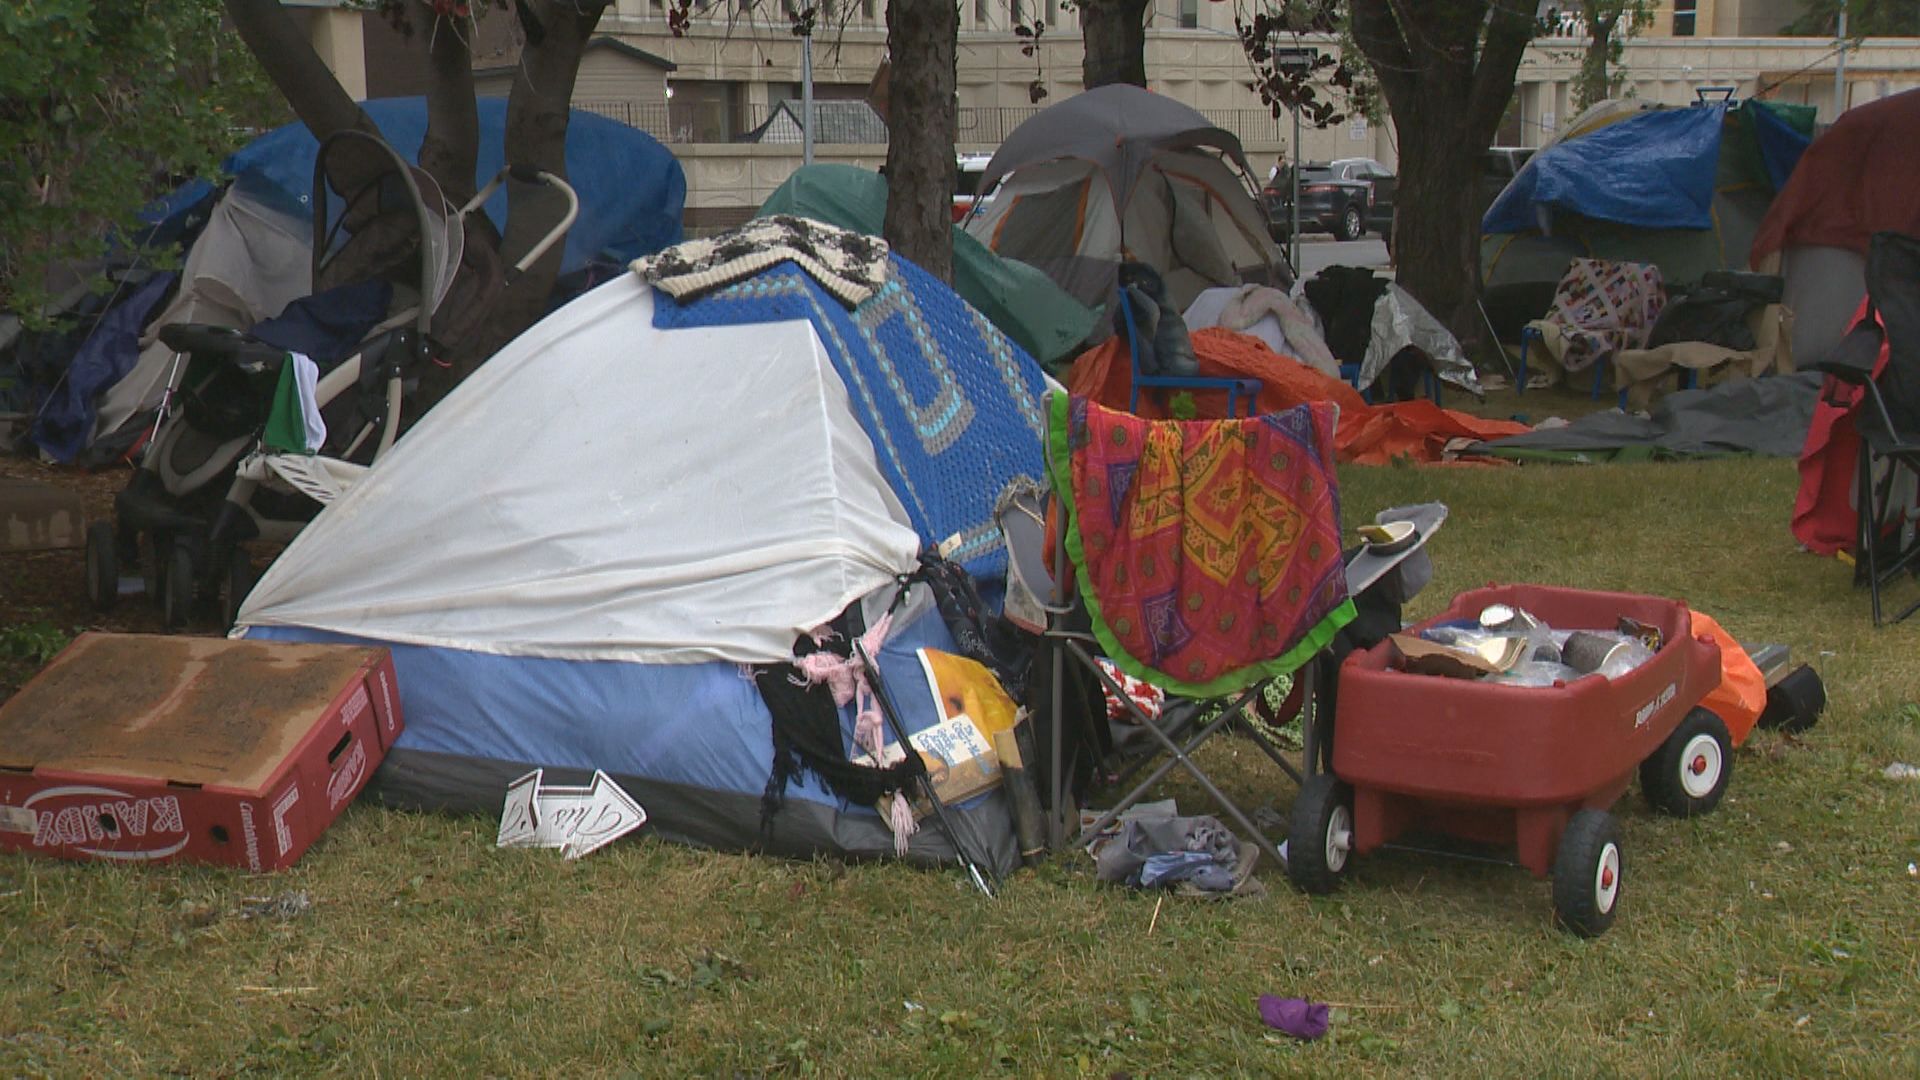 Big discussion on homelessness set for Regina city council meeting